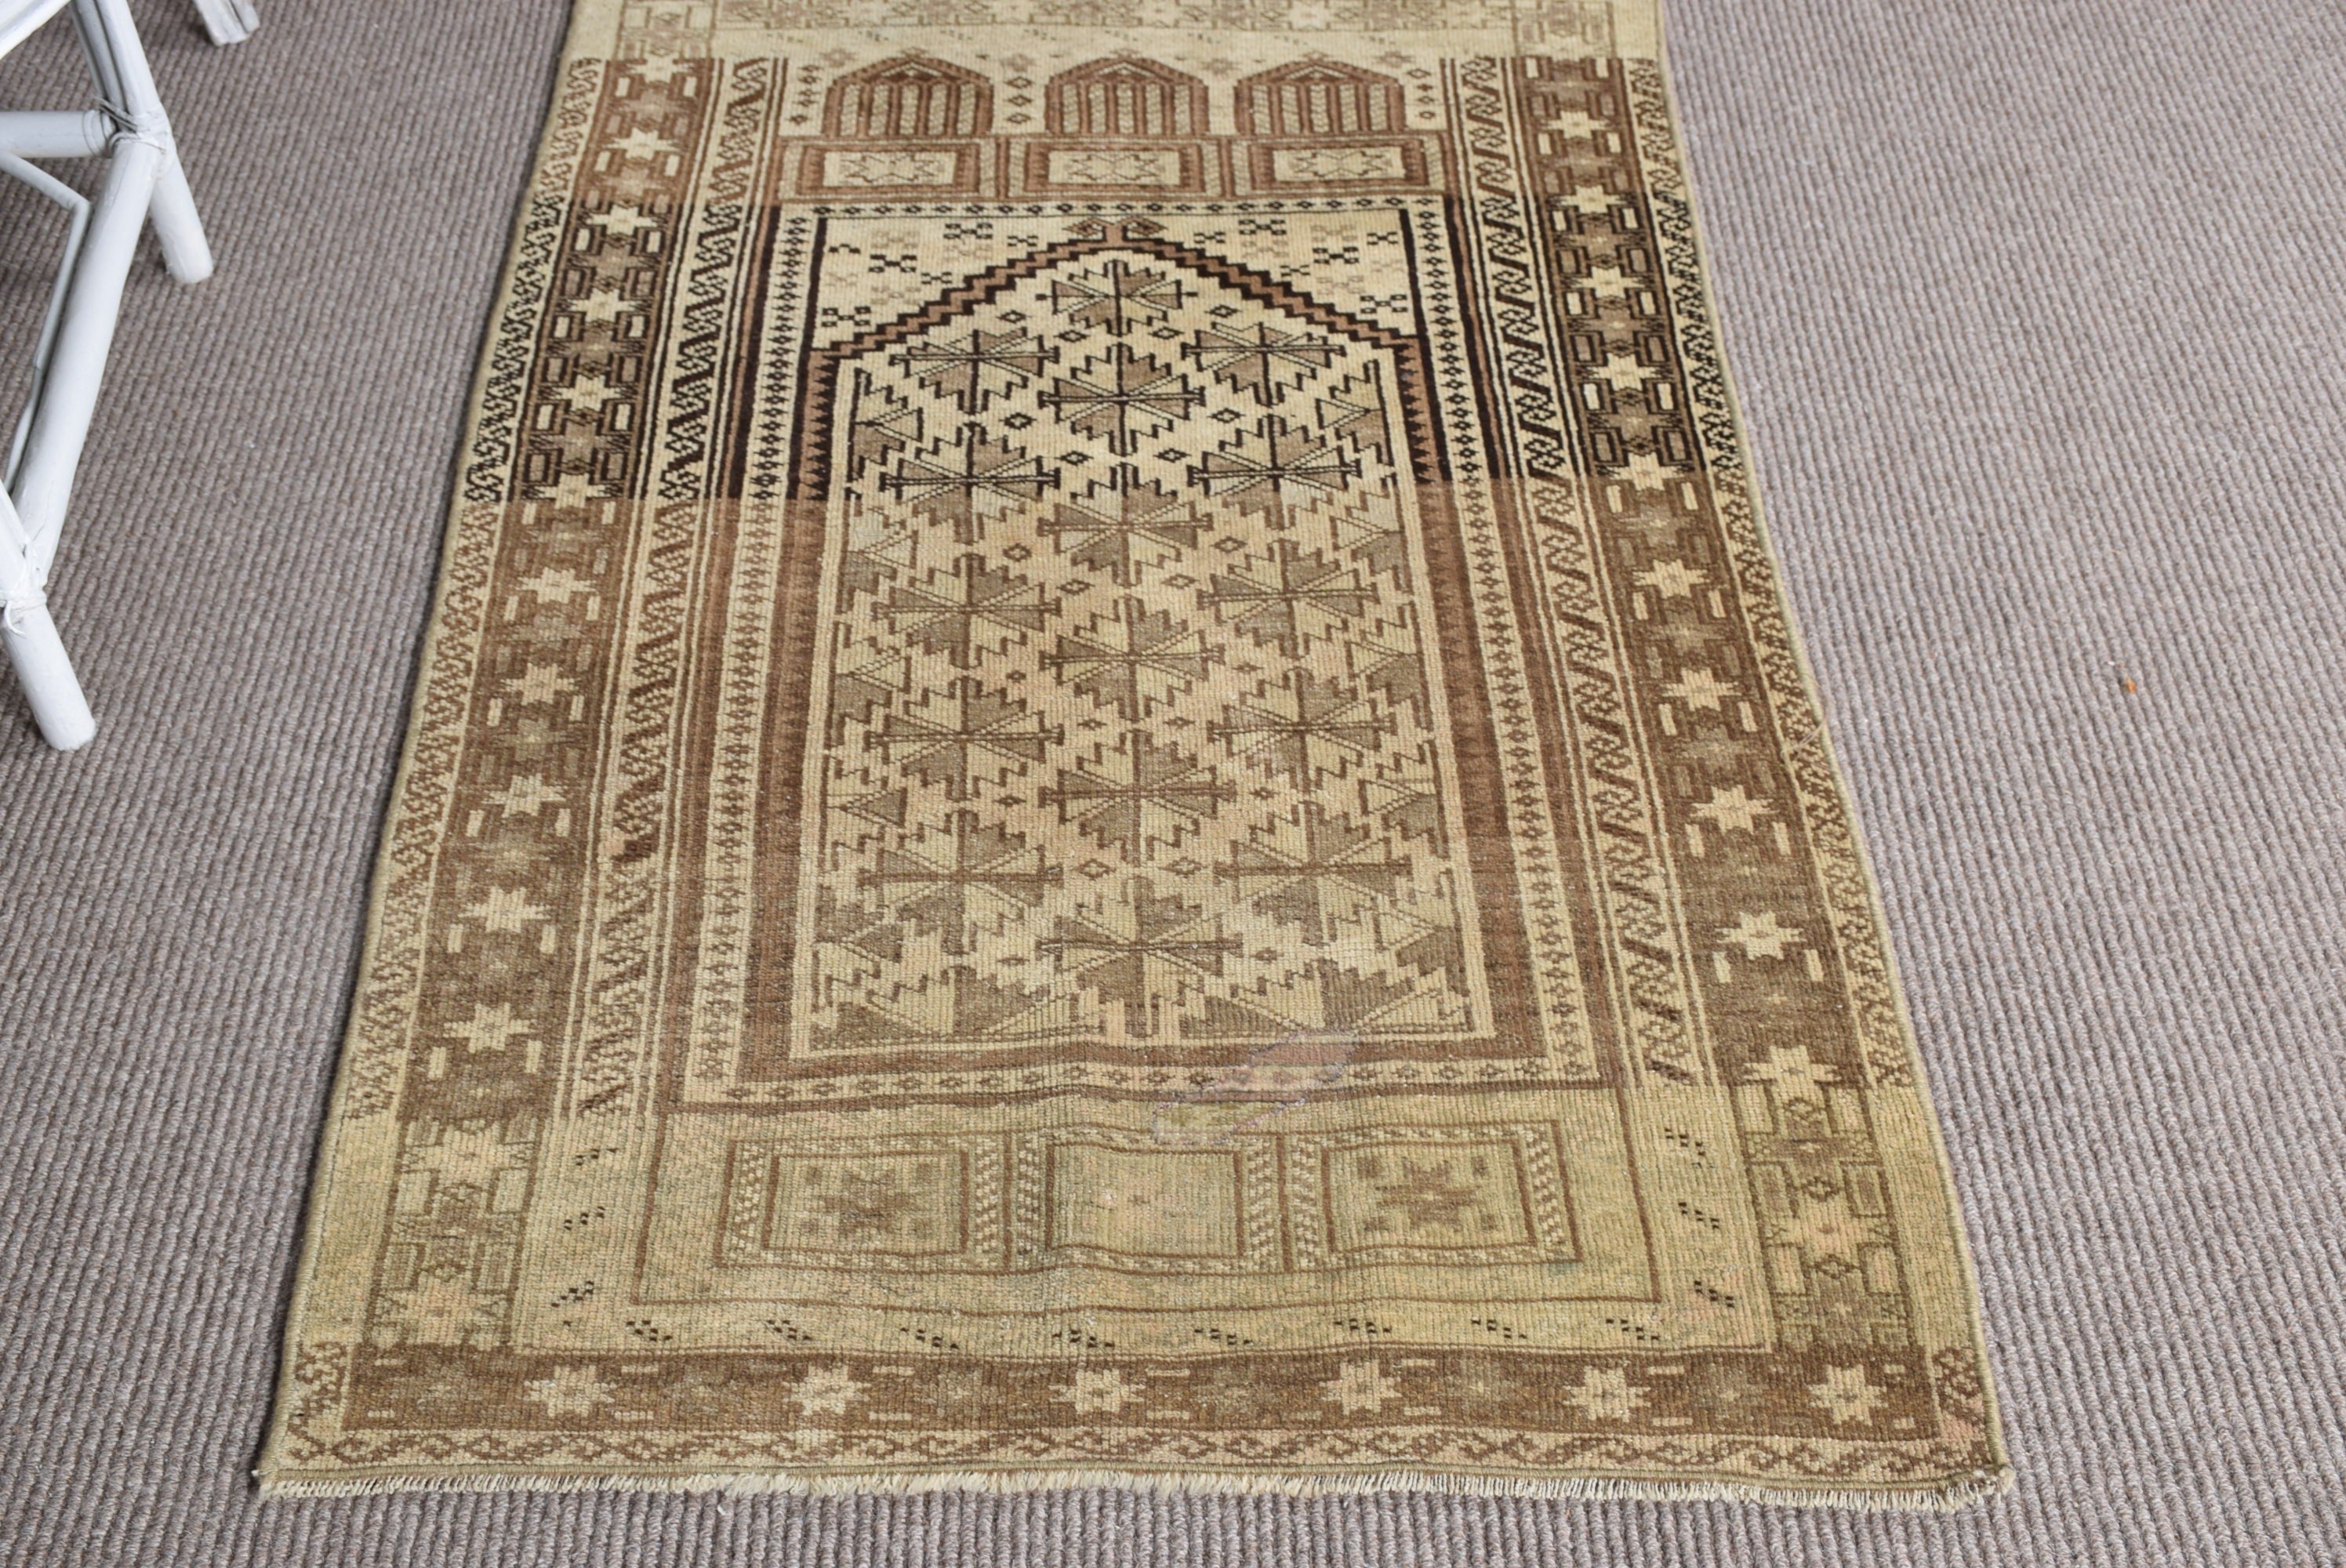 Wall Hanging Rug, Home Decor Rug, Oriental Rug, Vintage Rugs, Turkish Rugs, Bright Rugs, 2.7x4.6 ft Small Rugs, Bath Rugs, Bronze Cool Rugs